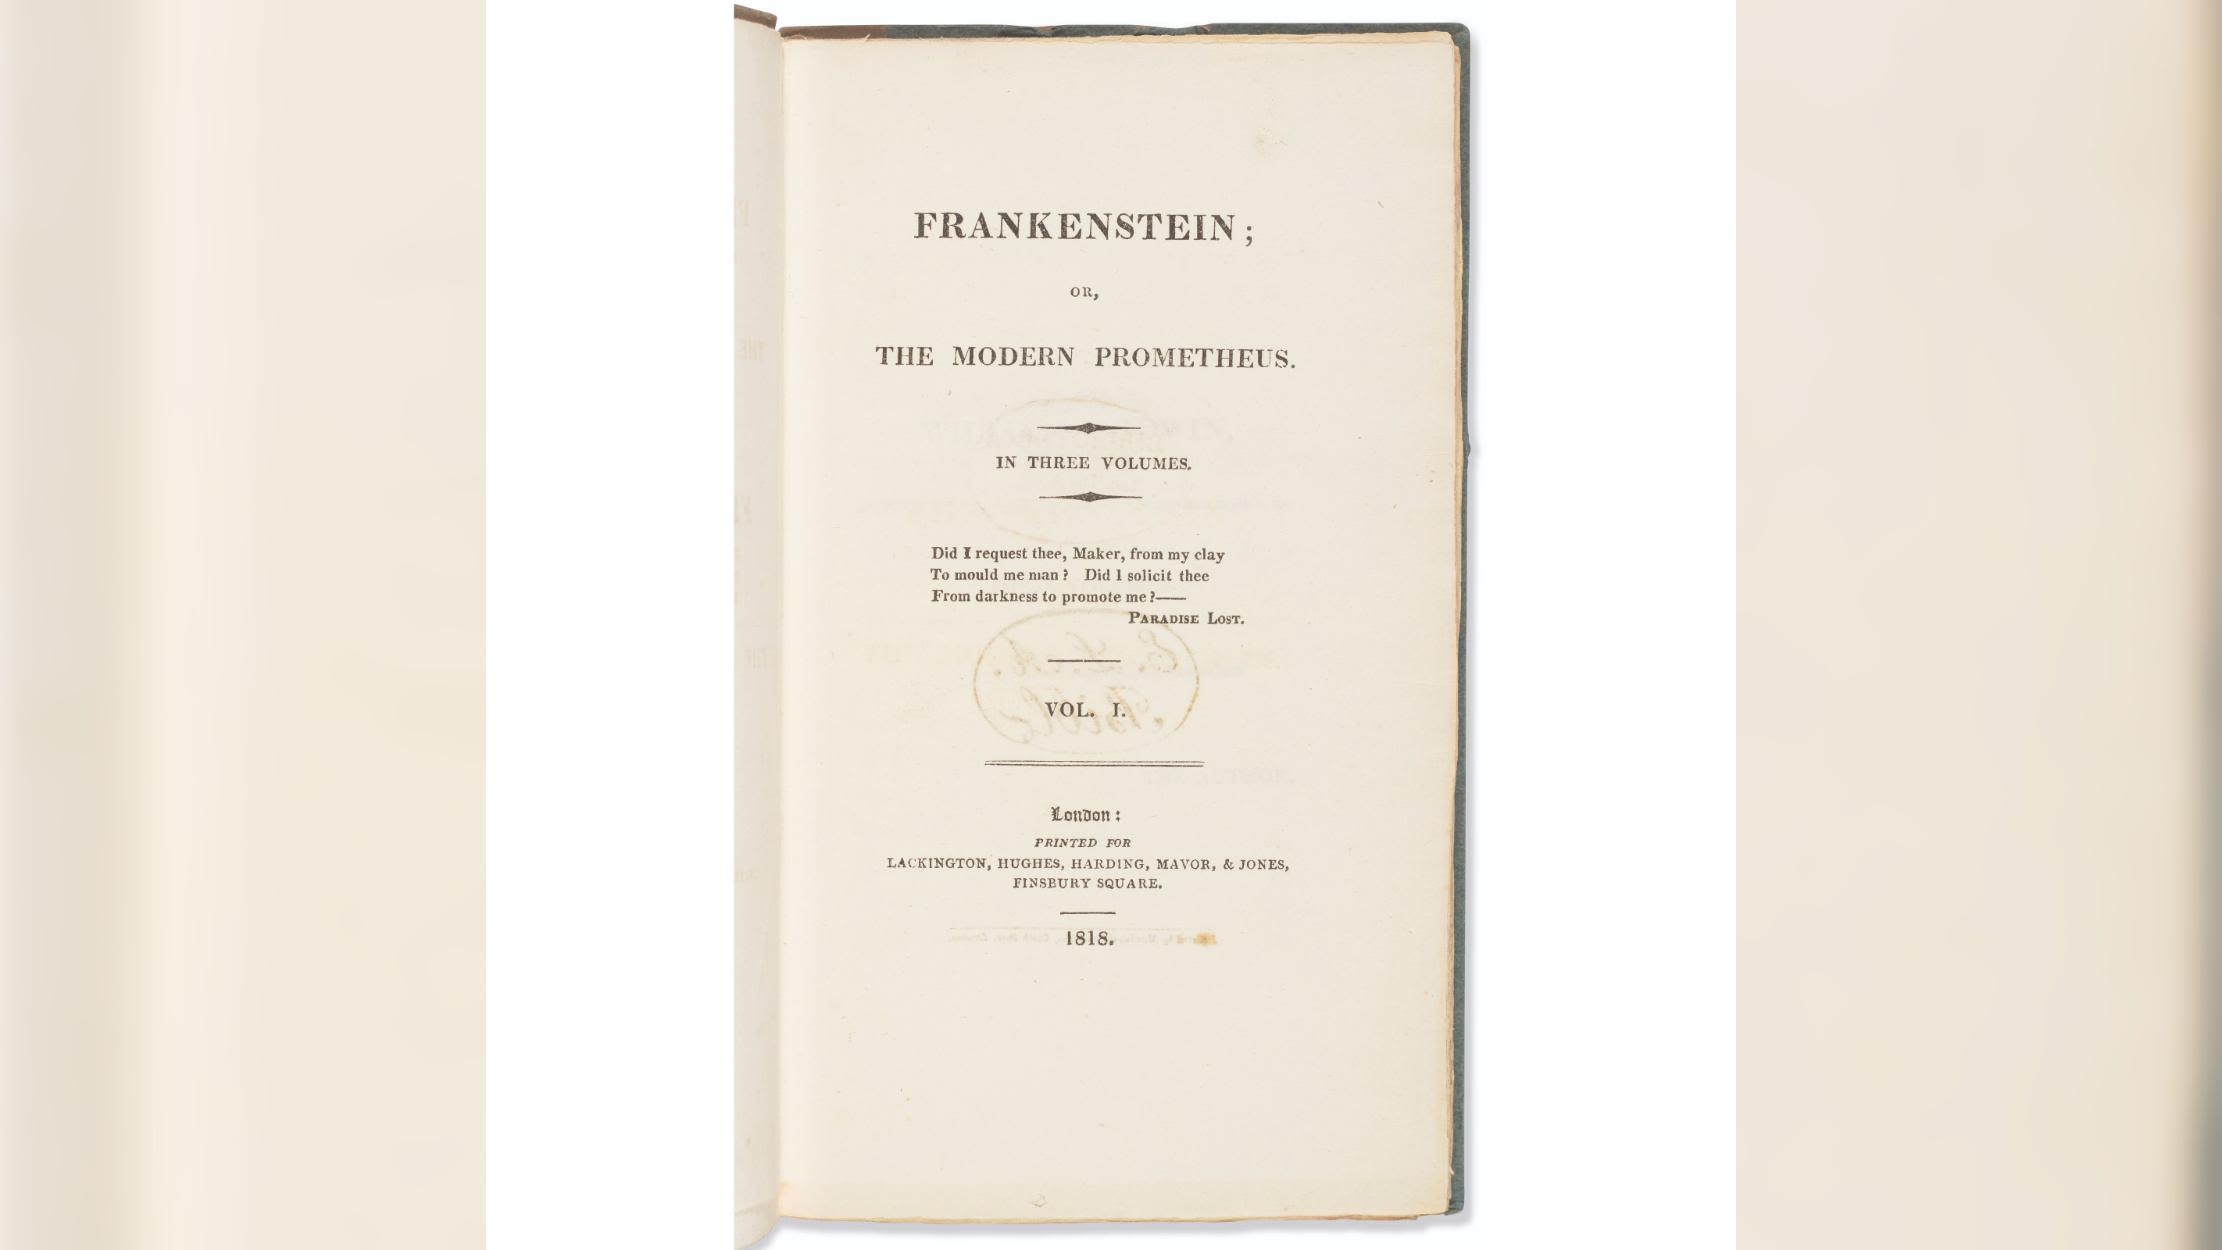 First edition copy of 'Frankenstein' sells for over $1 million at